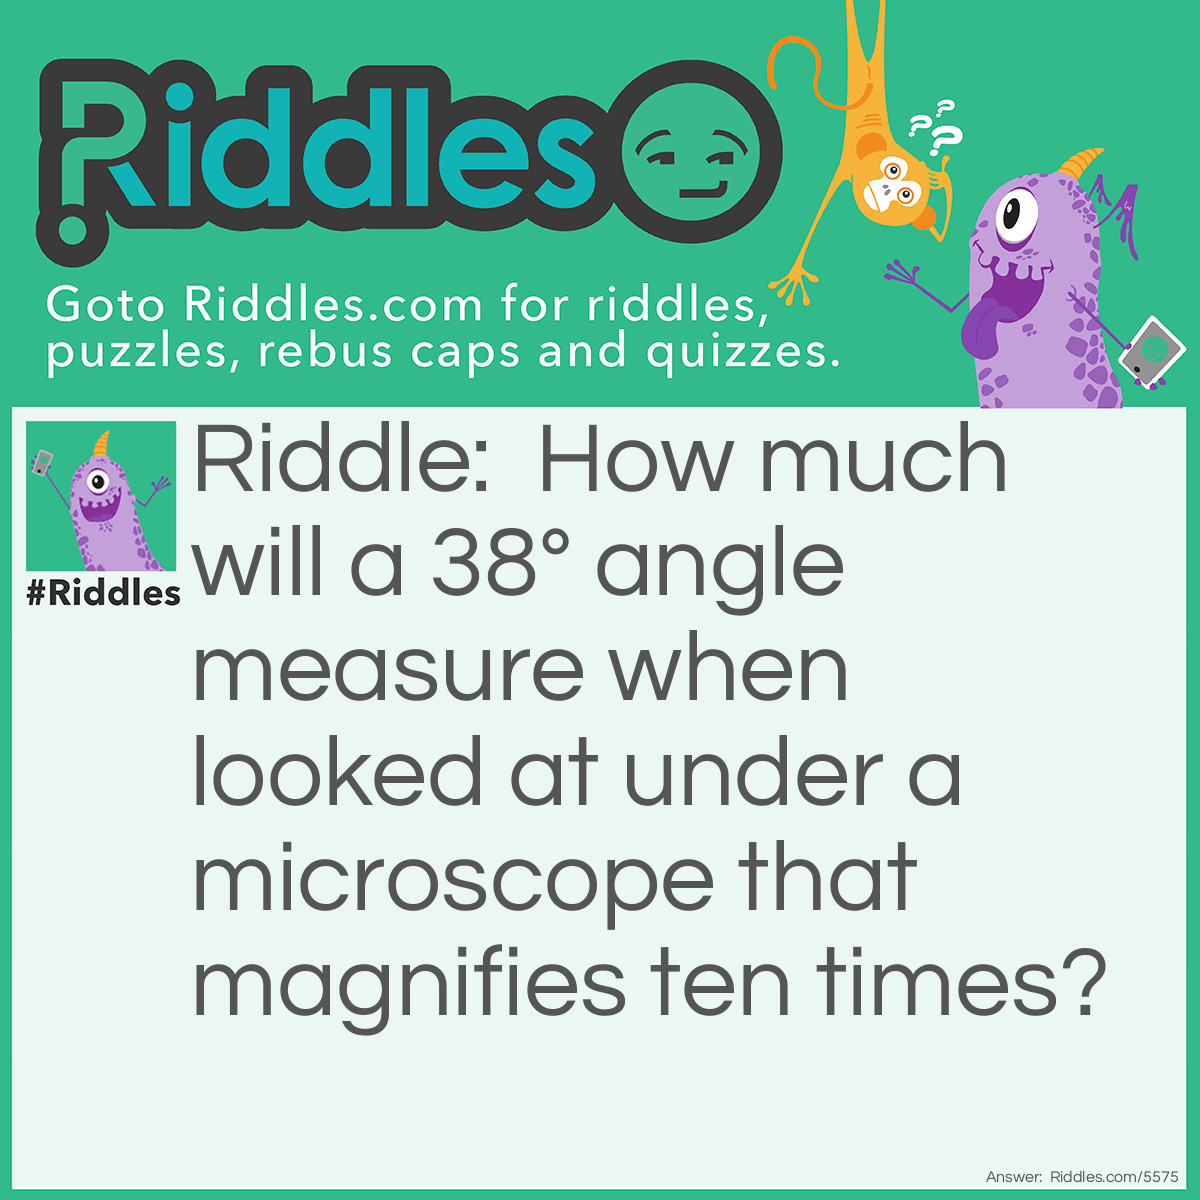 Riddle: How much will a 38° angle measure when looked at under a microscope that magnifies ten times? Answer: It will still be 38°.